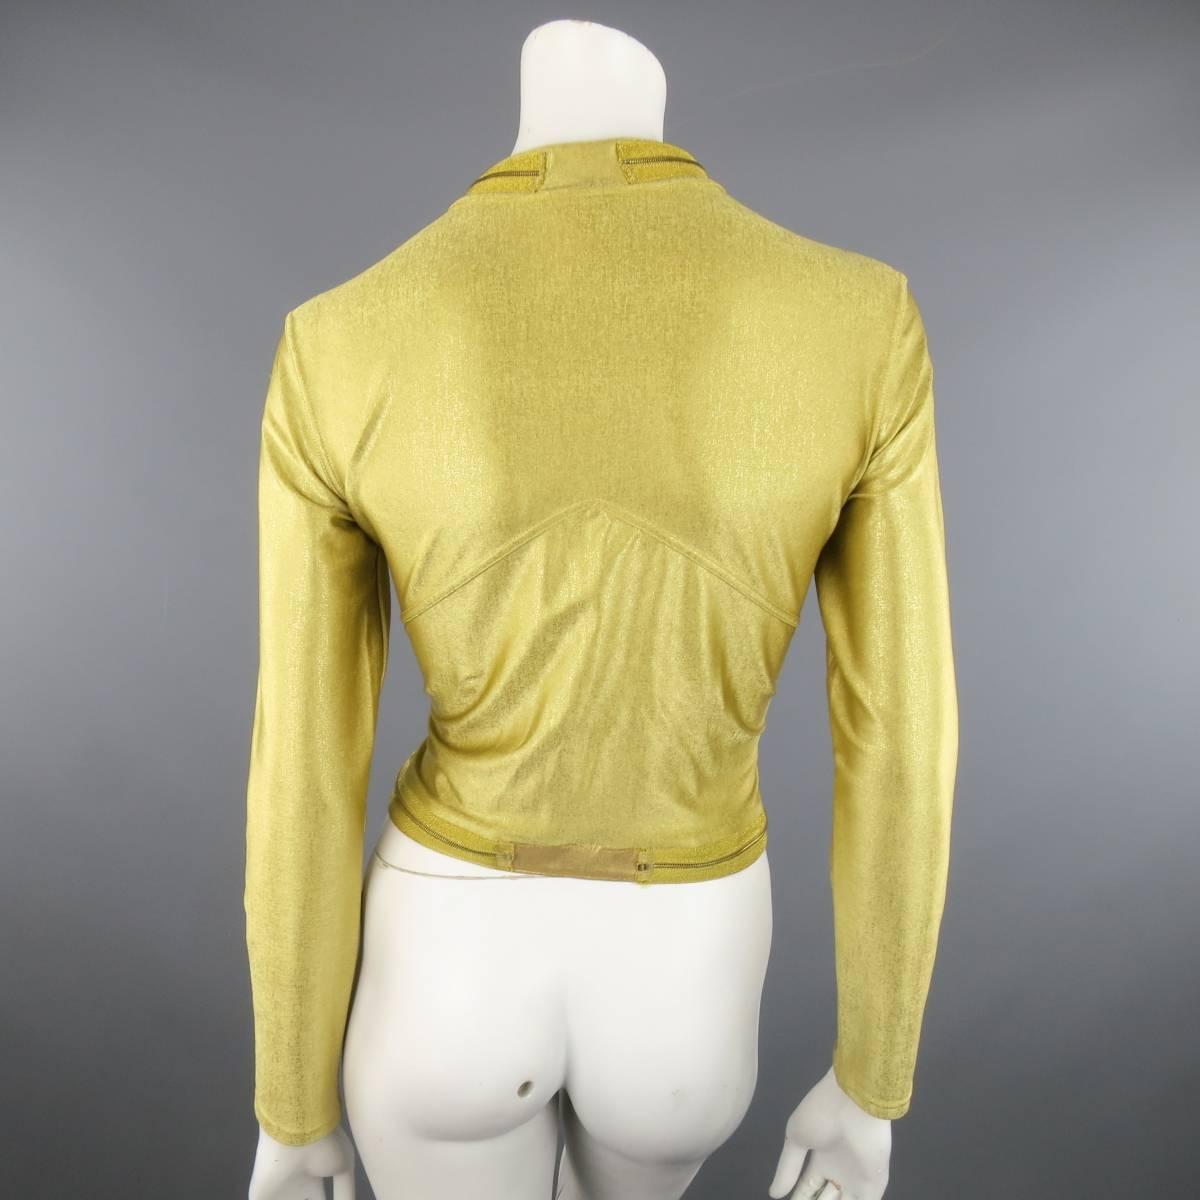 Vintage CHANEL cropped moto style jacket in light weight, stretchy metallic gold lame' featuring a stand up zip collar and waistband. Made in France.
 
Excellent Pre-Owned Condition.
Marked: FR 42 01C
 
Measurements:
 
Shoulder: 16.5 in.
Bust: 38